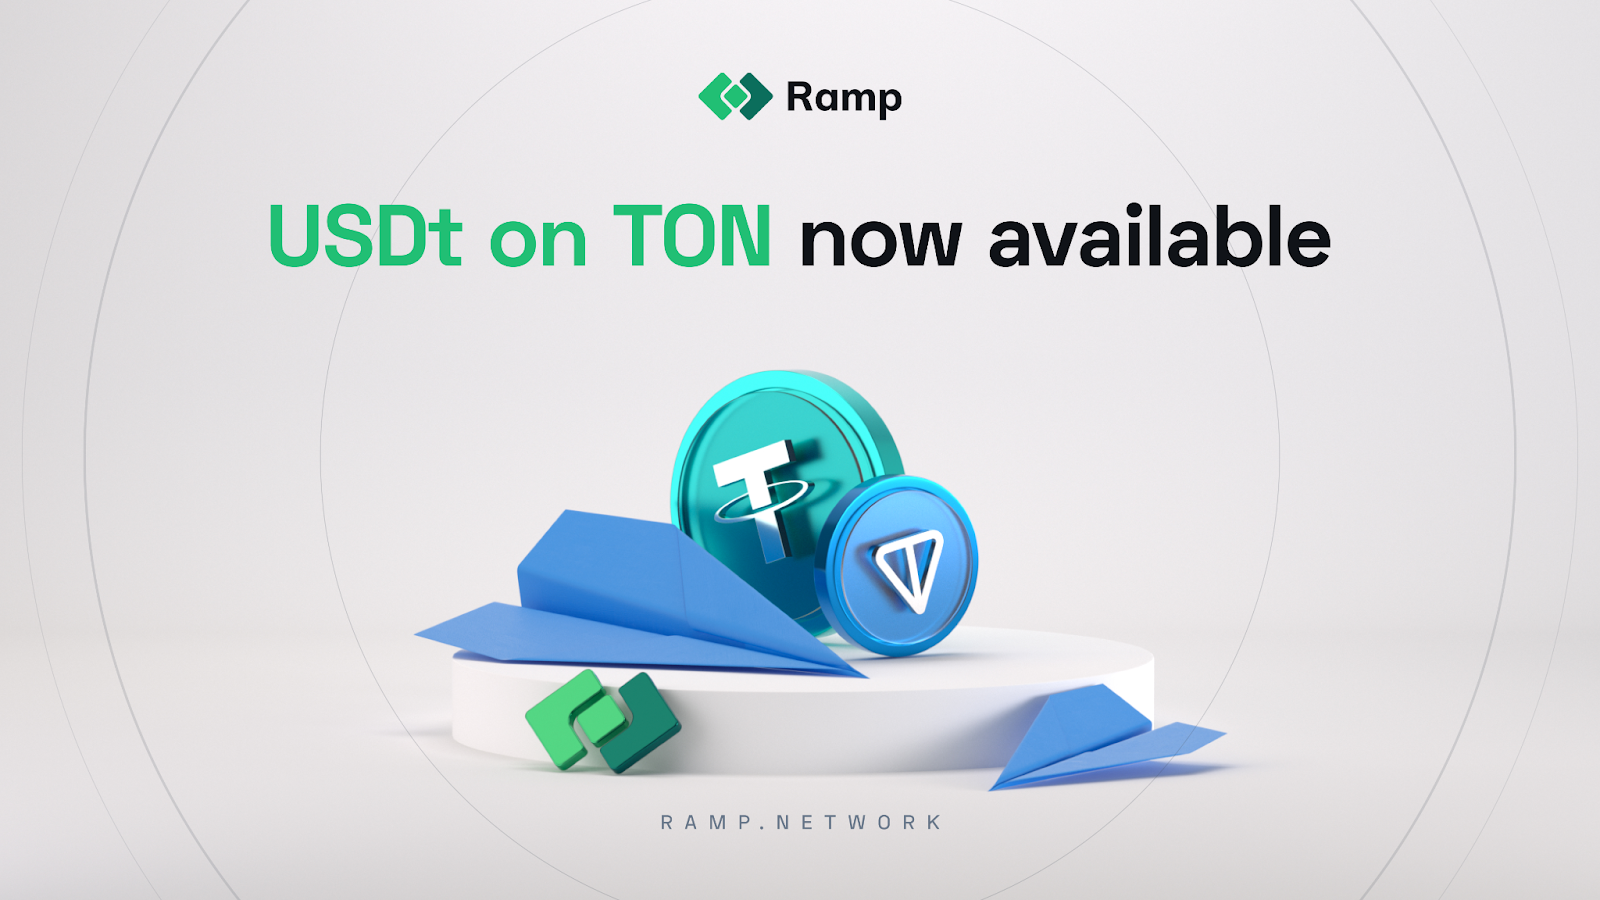 Ramp Network Facilitates USDt on TON Transactions for Global Users